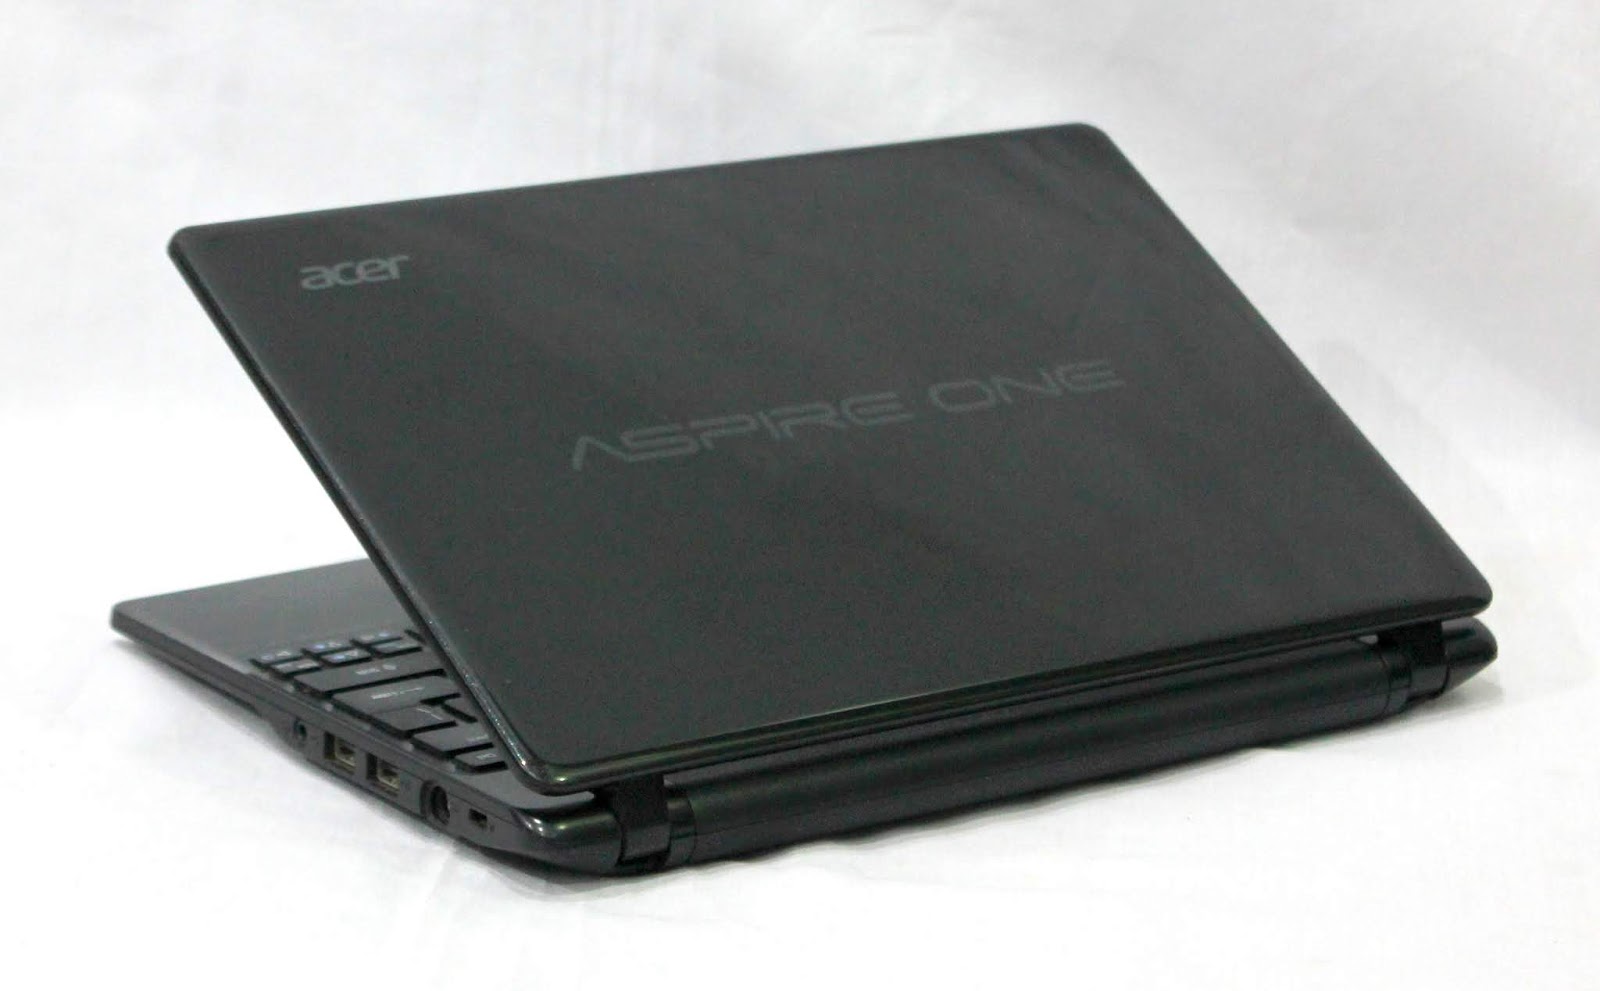 Aspire one 725. Acer Aspire 725. Acer Aspire one 11.6. Acer 725-c6skk. Acer one 725.